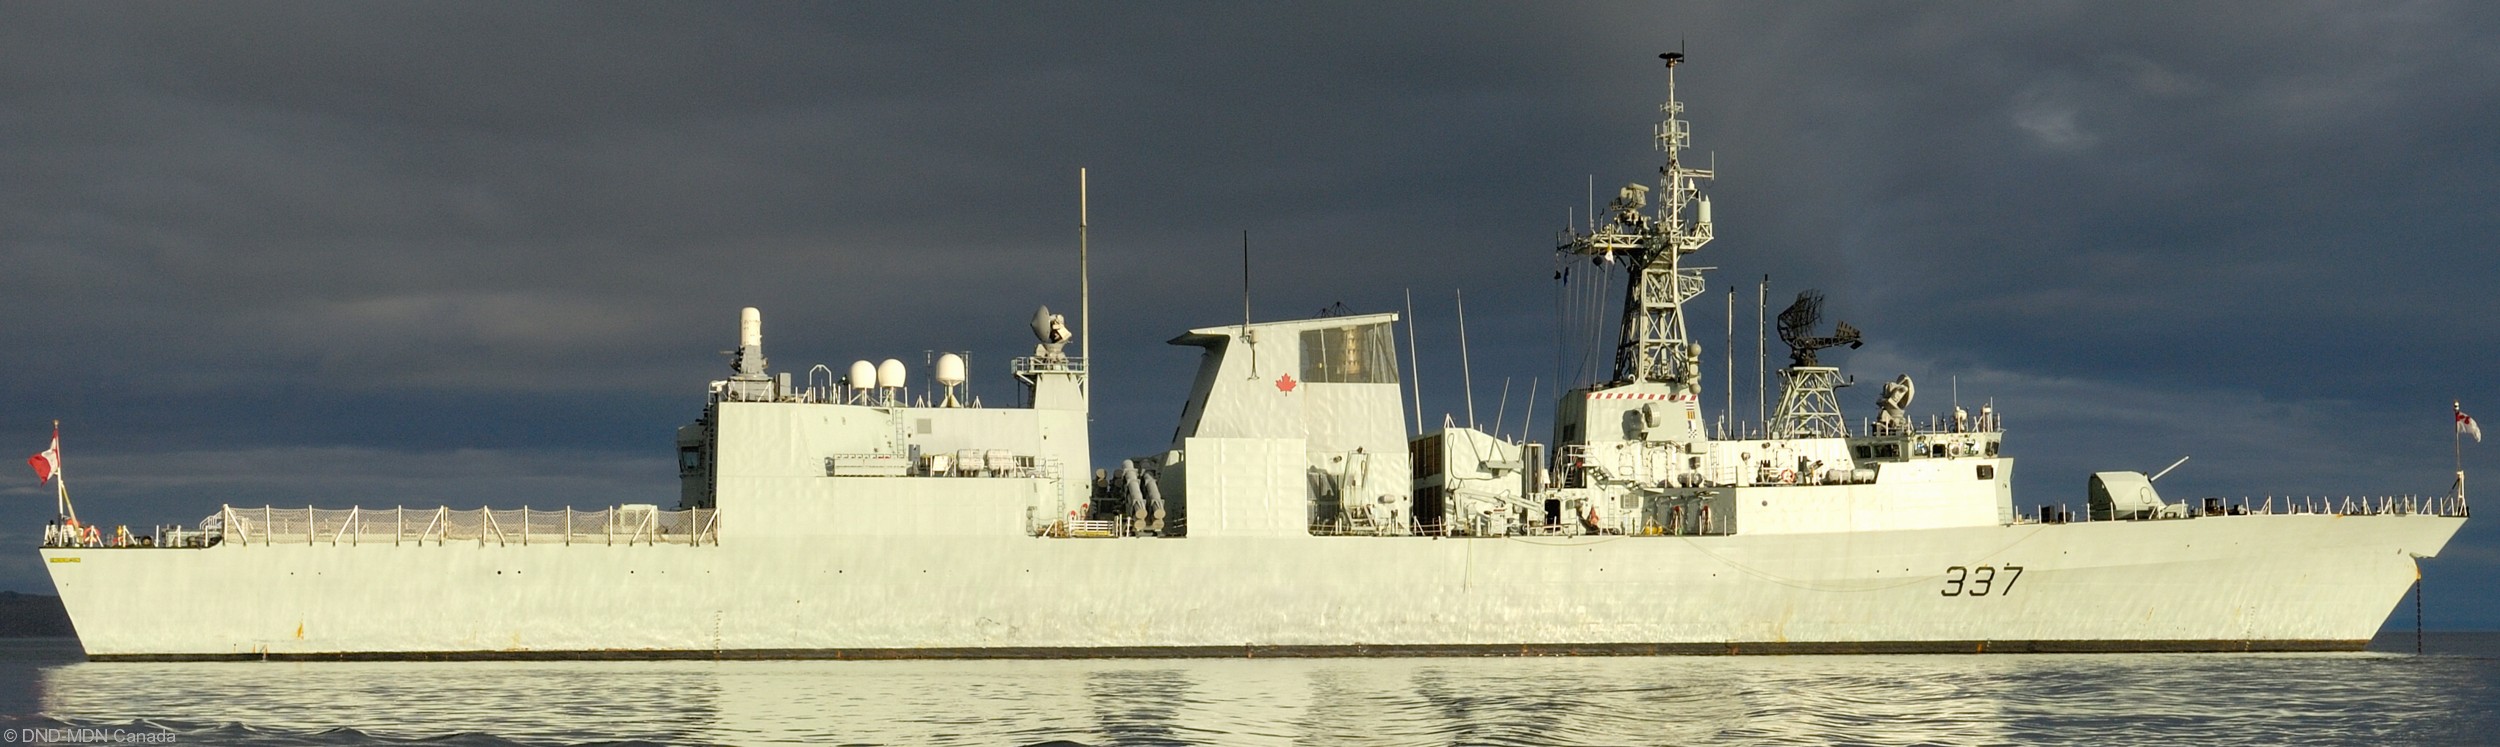 ffh-337 hmcs fredericton halifax class helicopter patrol frigate ncsm royal canadian navy 37